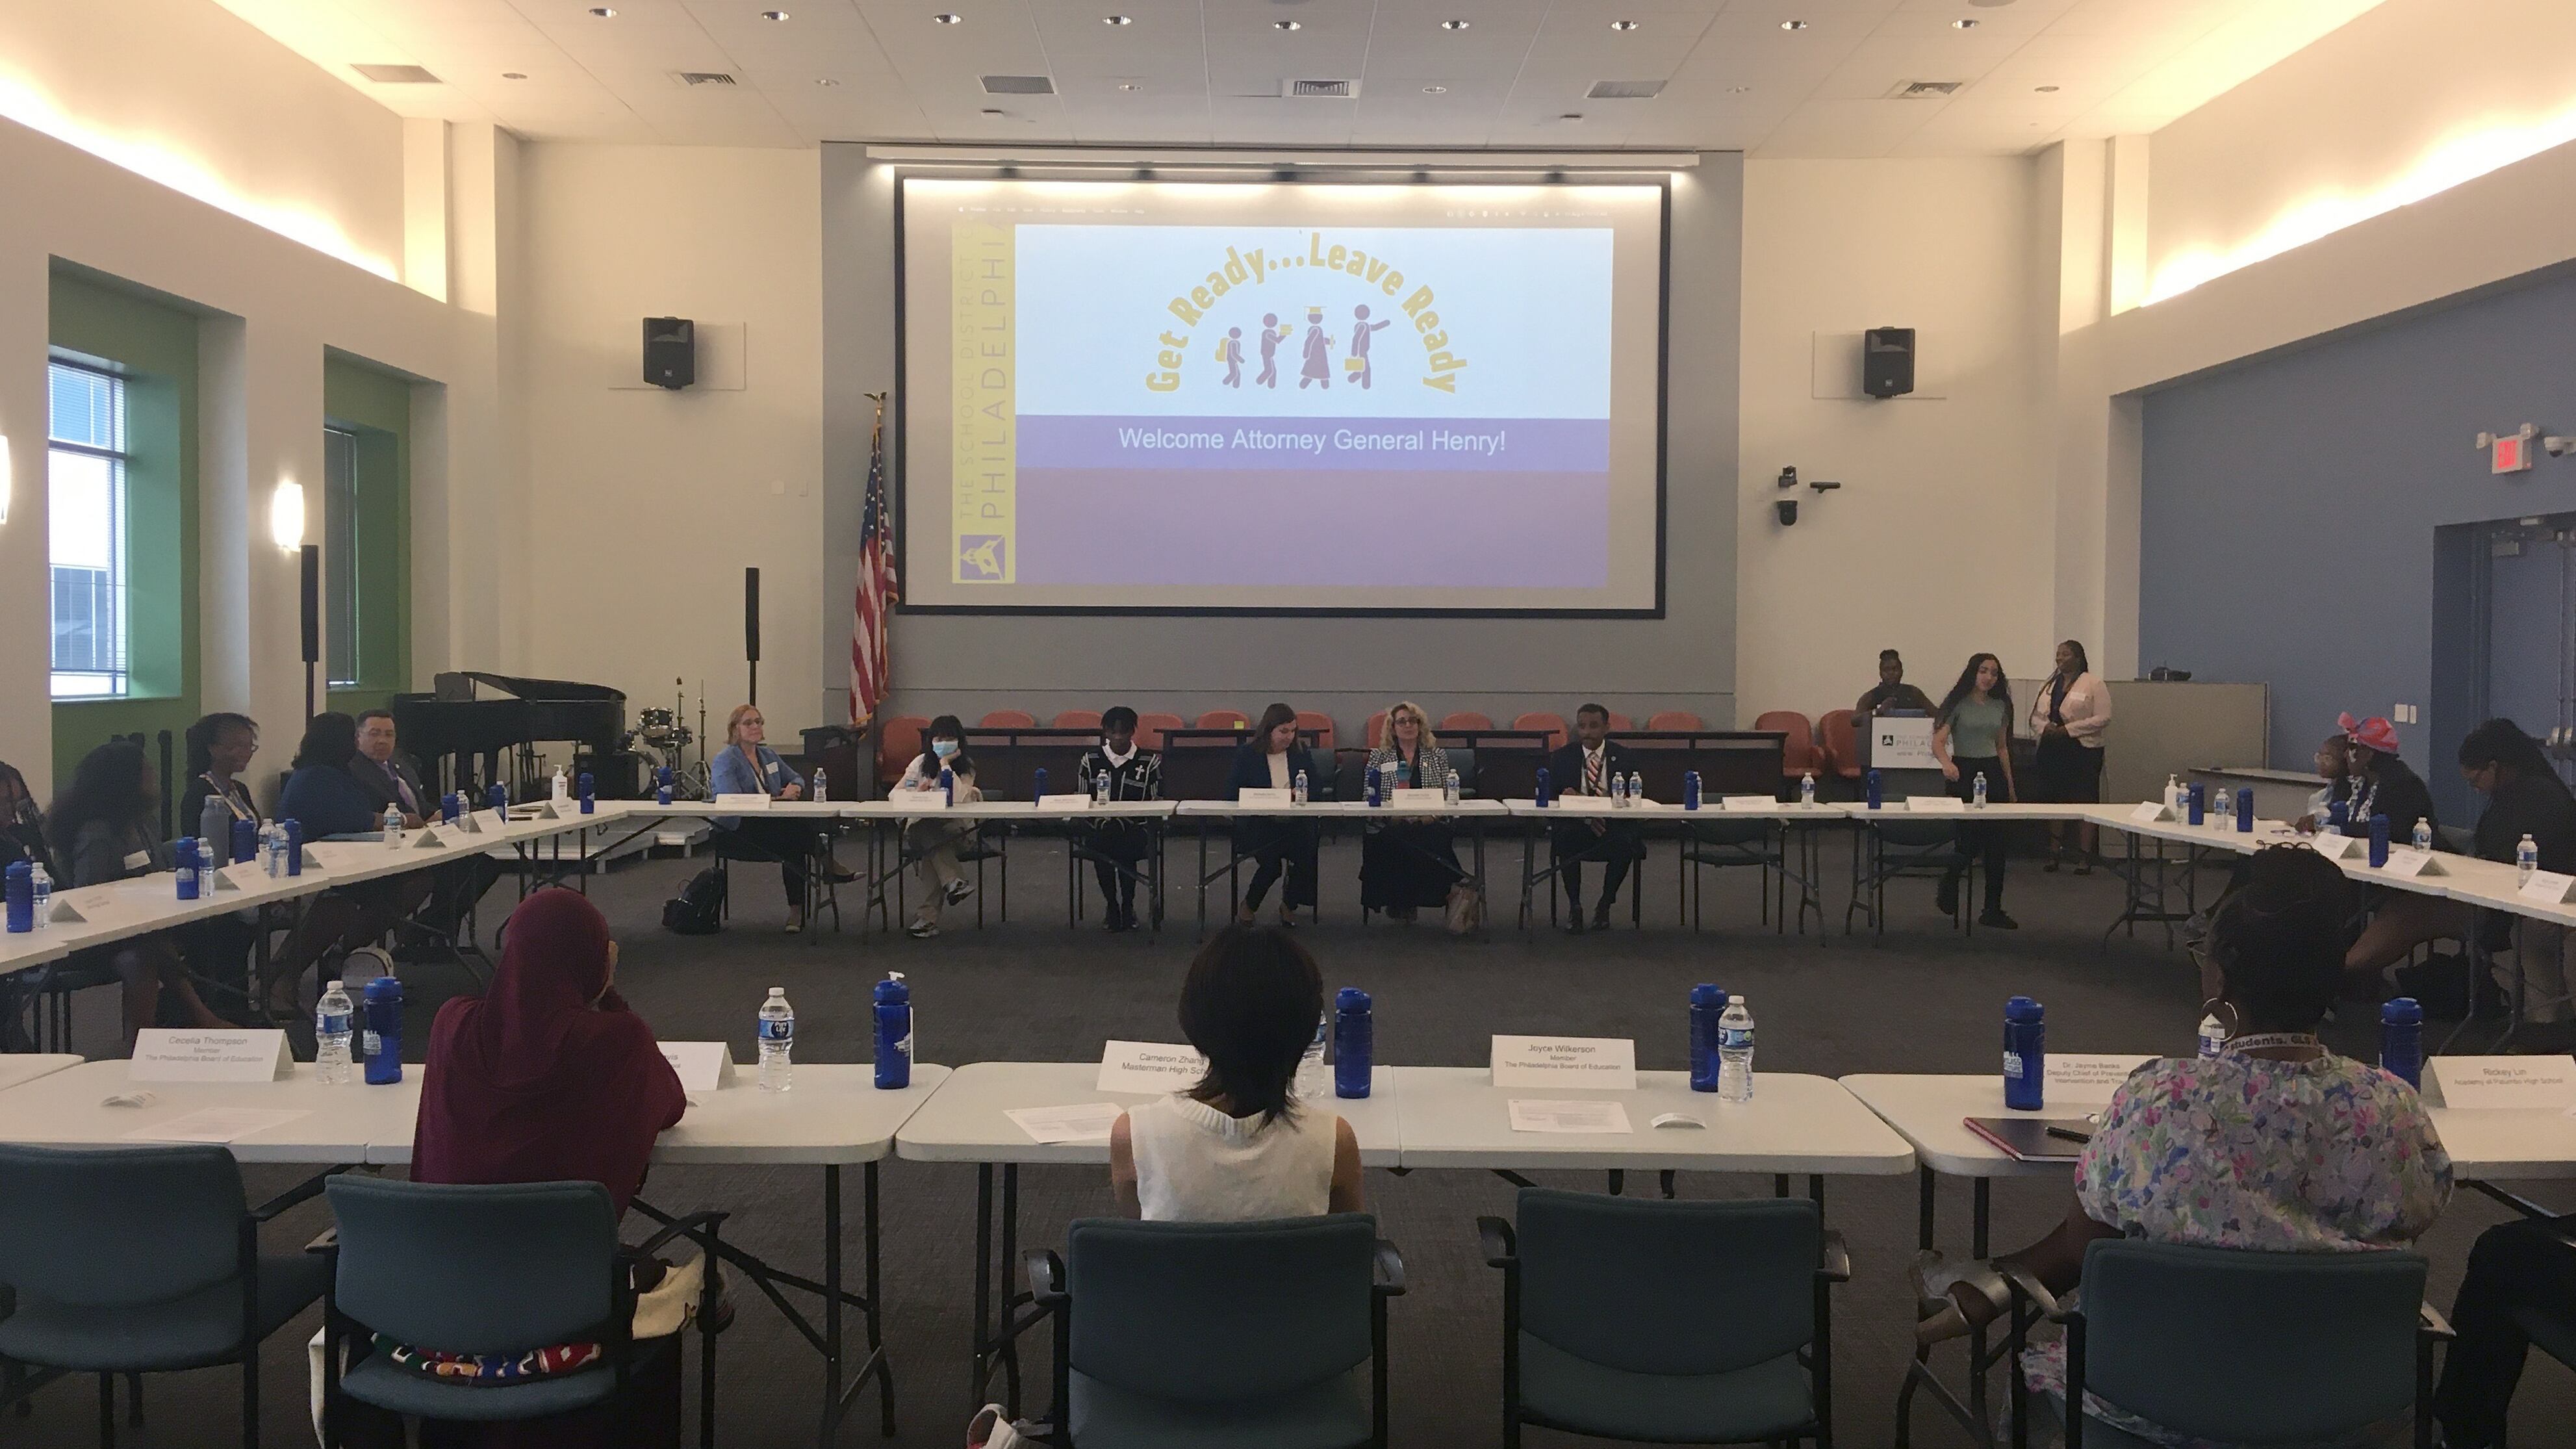 Students talk about gun violence and mental health during a roundtable discussion at the Philadelphia School District building on Friday, Aug. 4, 2023 in Philadelphia, Penn.